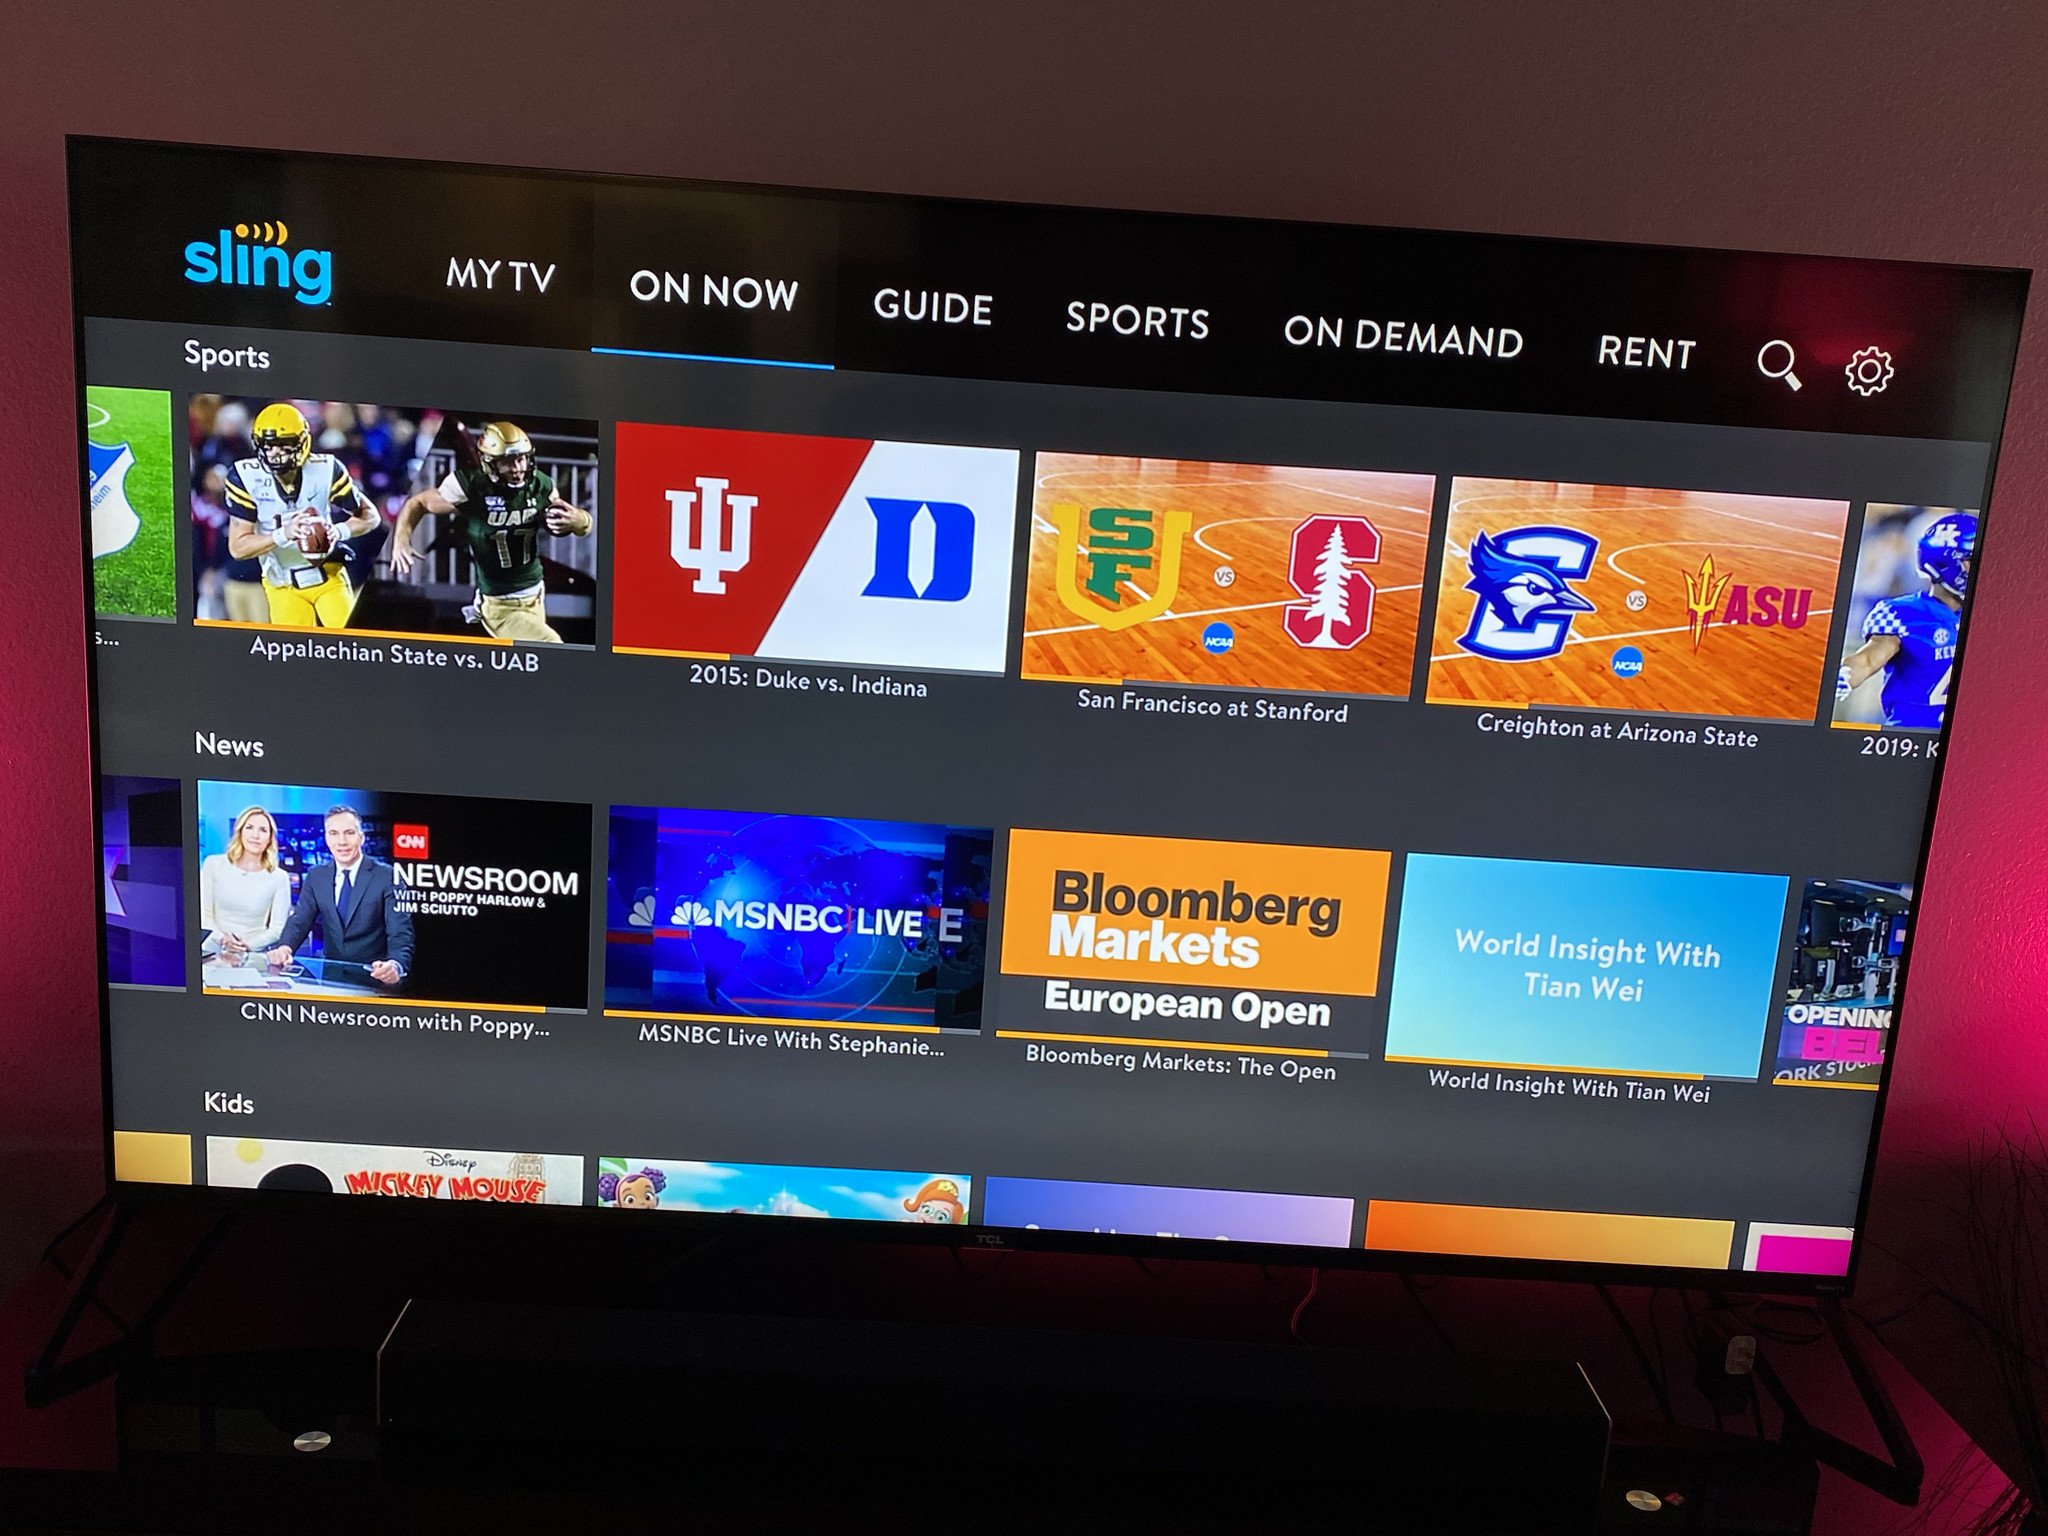 Get a free Fire TV Stick when you prepay for two months of Sling TV thumbnail